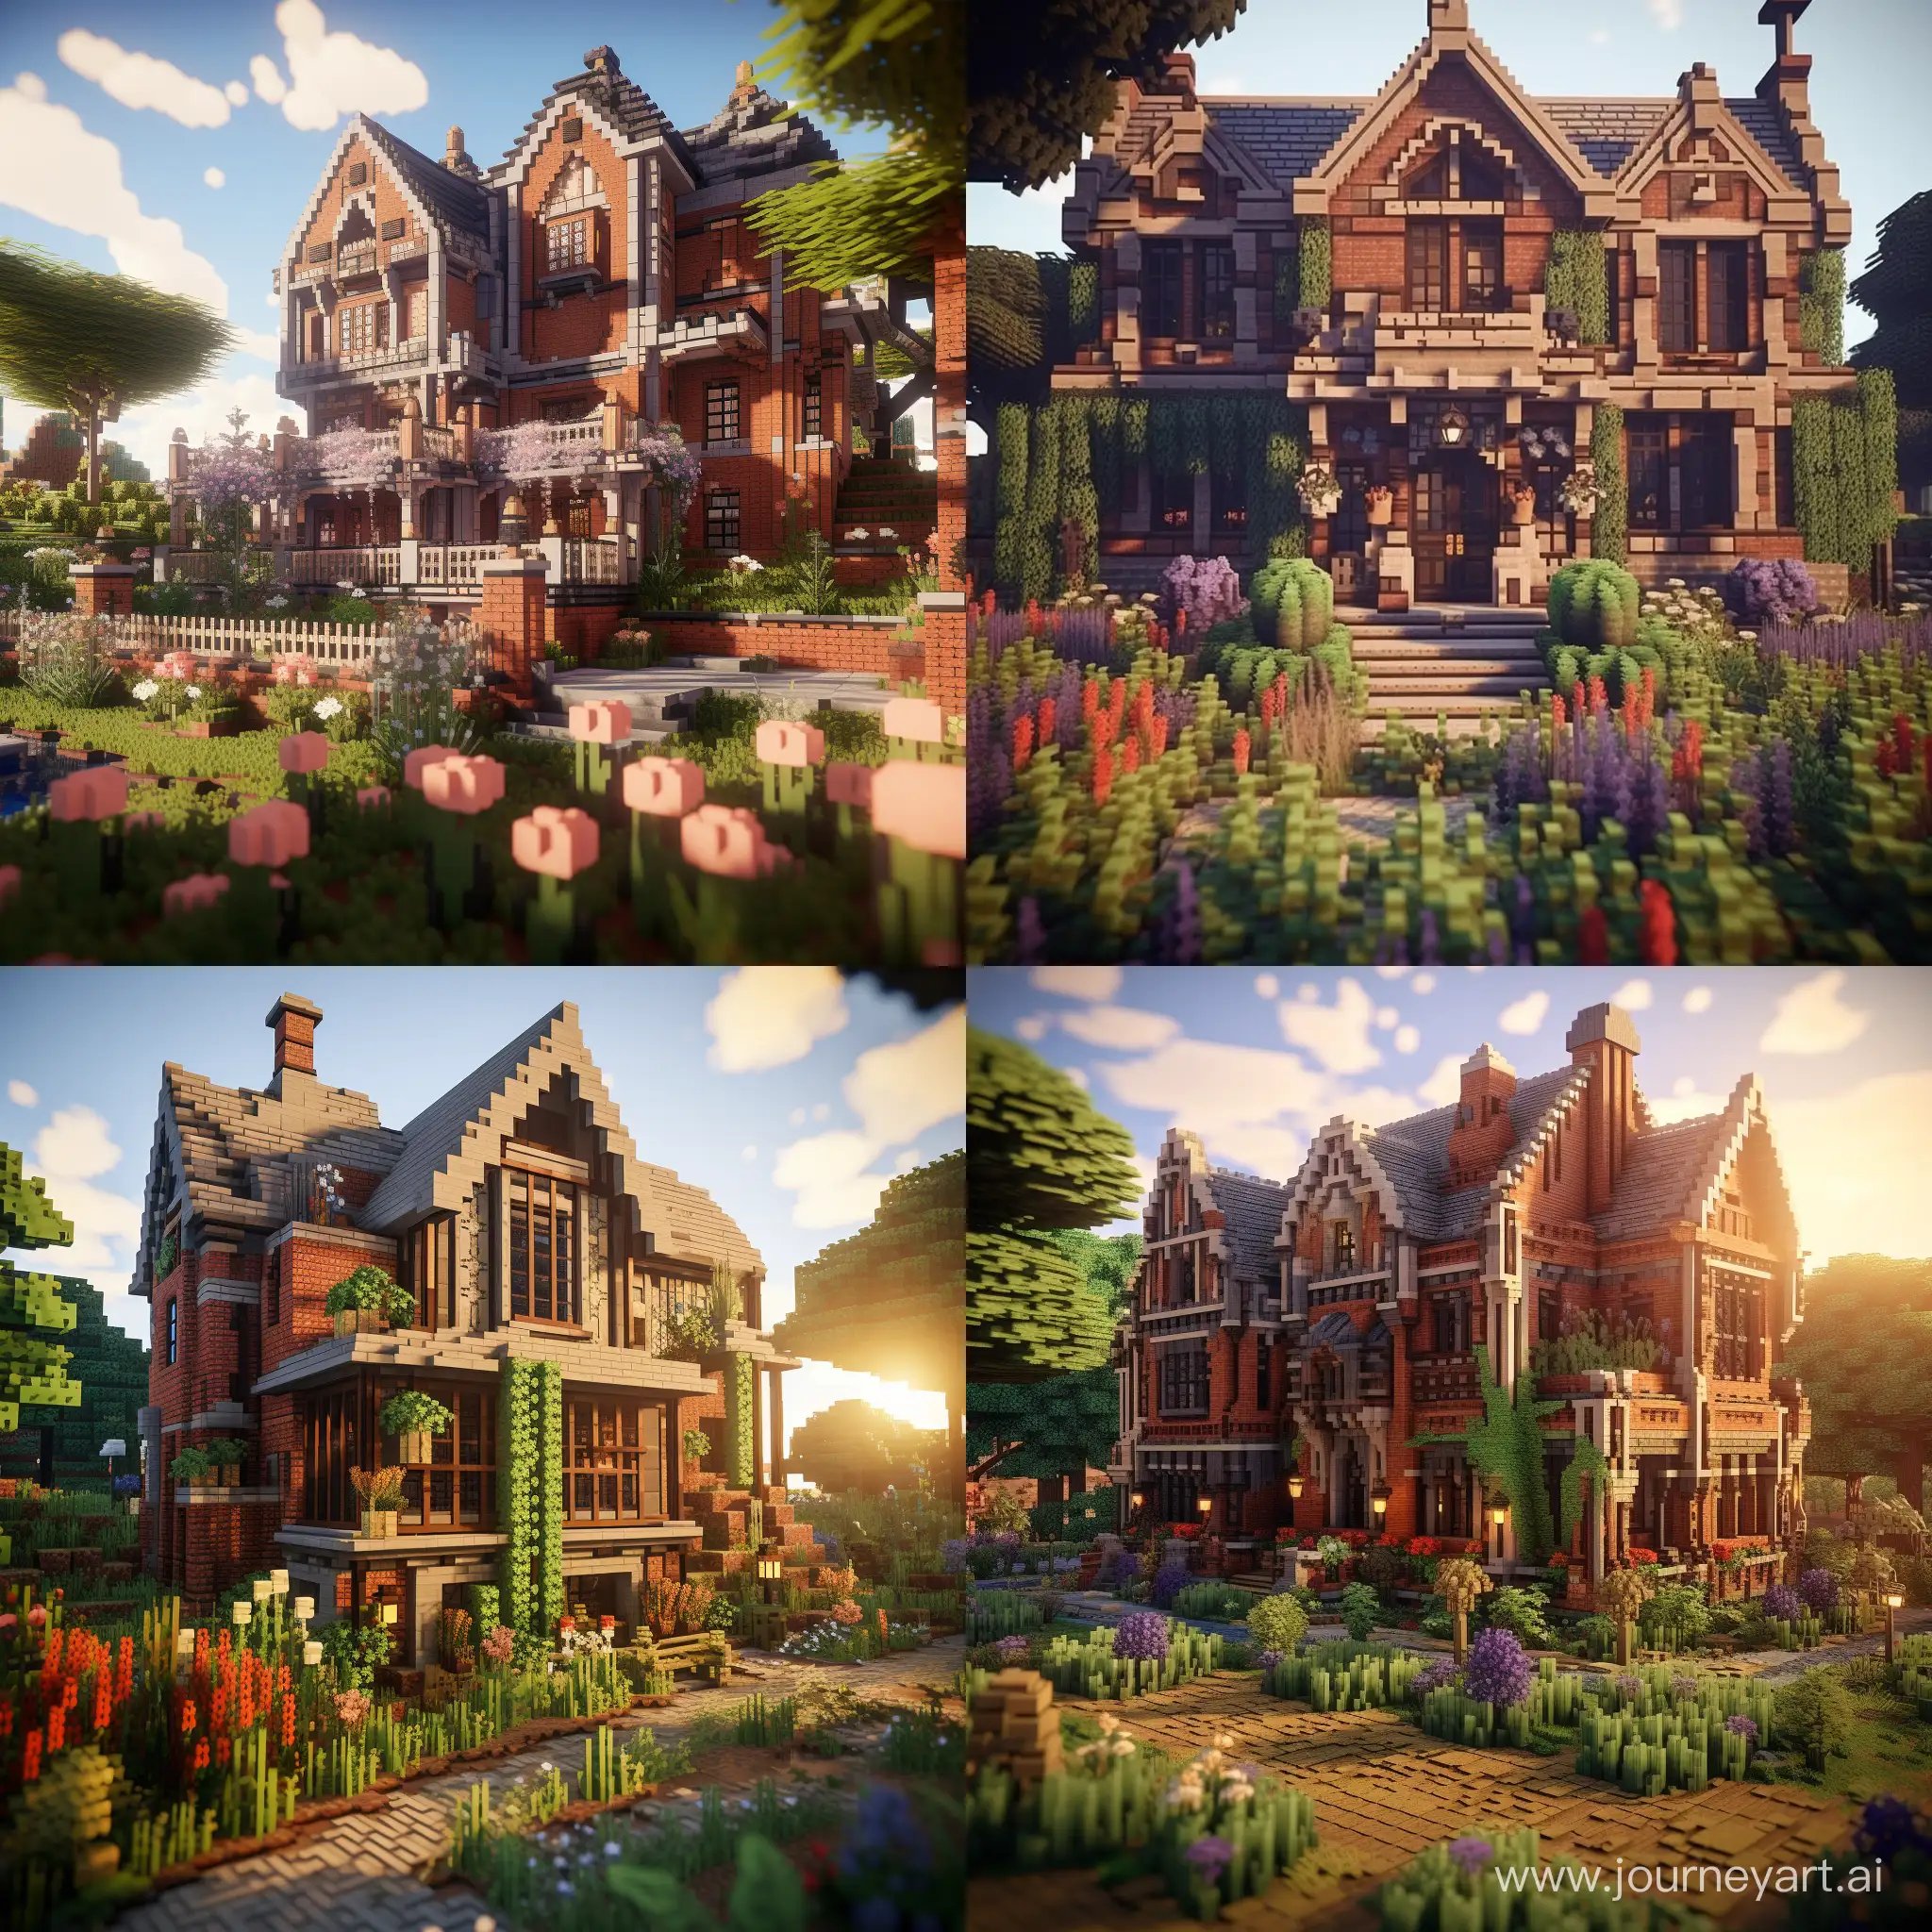 make a minecfrafty victorian house with redbricks, make it big with a garden on a small hill